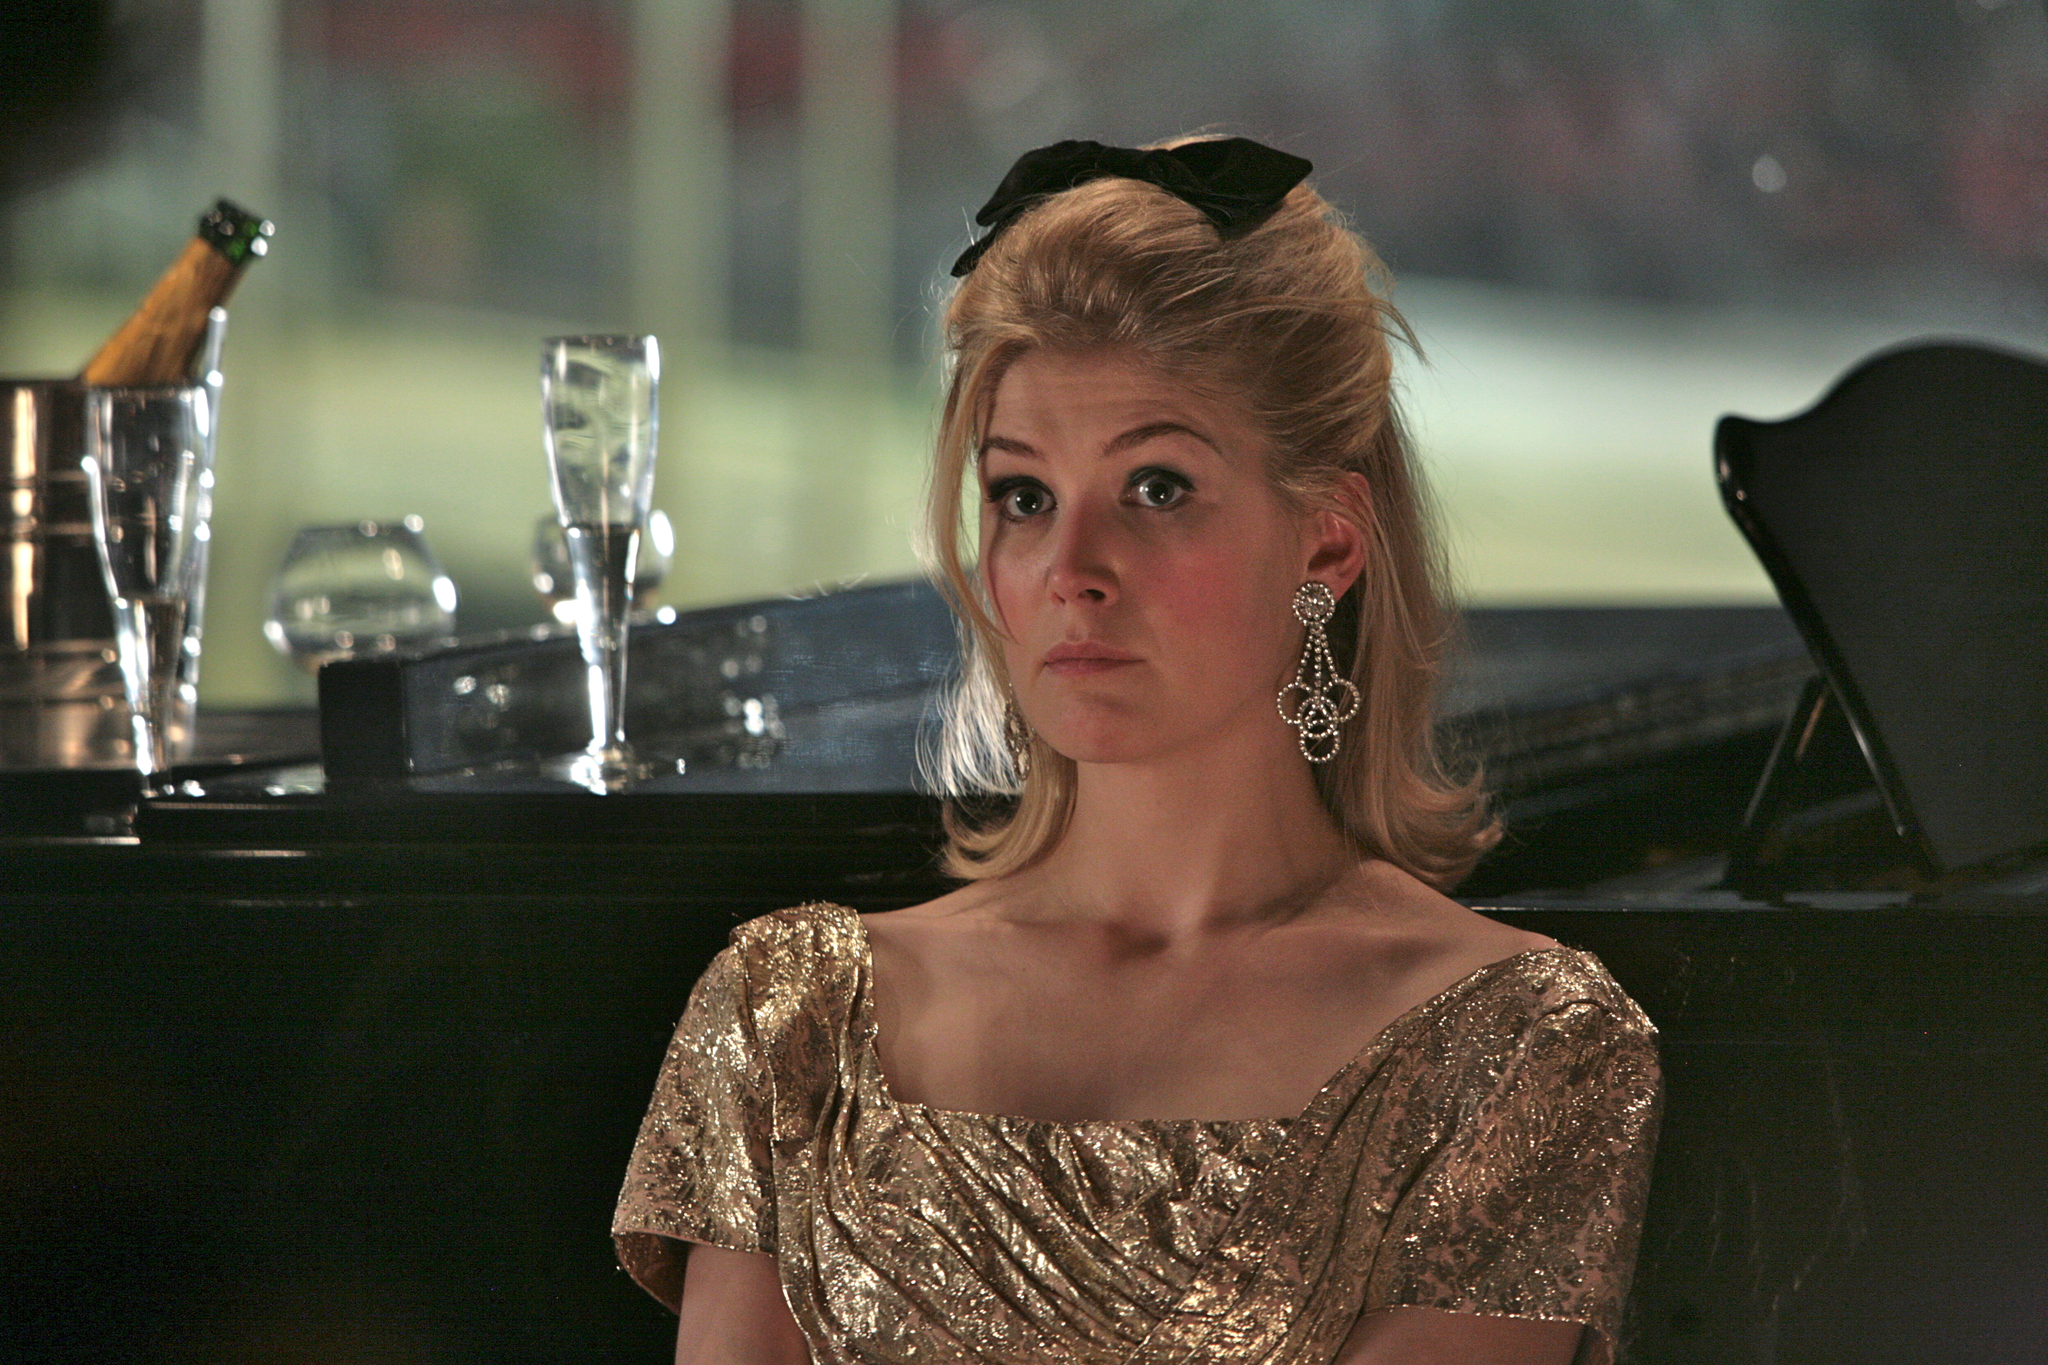 Still of Rosamund Pike in An Education (2009)